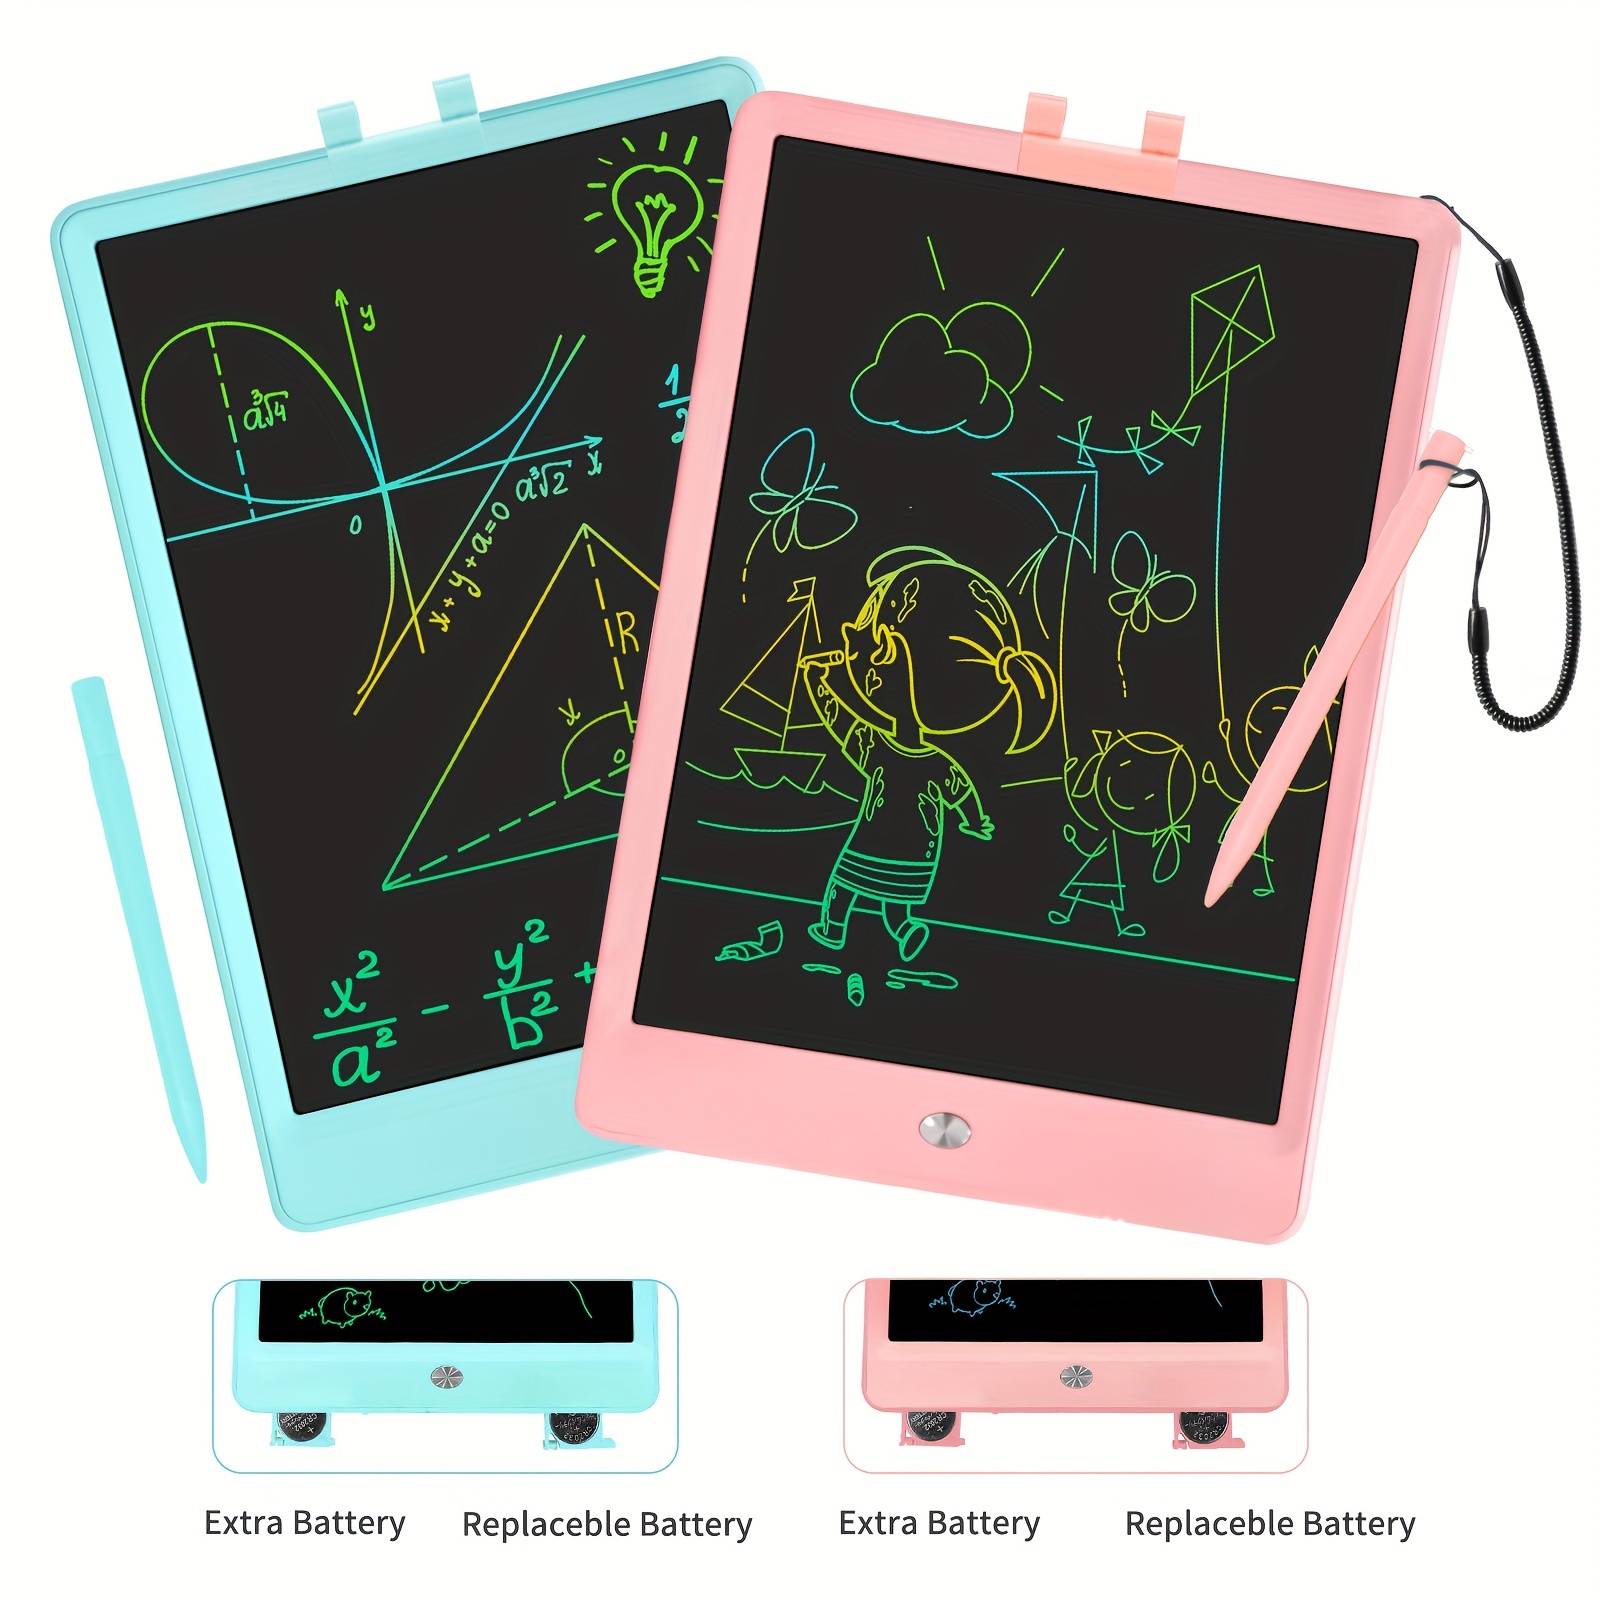 

2pcs Lcd Writing Tablet Doodle Board Toys Gifts For 3-8 Year Old Girls Boys, 10 Inch Colorful Electronic Board Drawing Pad For Kids, Gifts For Toddler Educational Learning Travel Birthday (blue+pink)